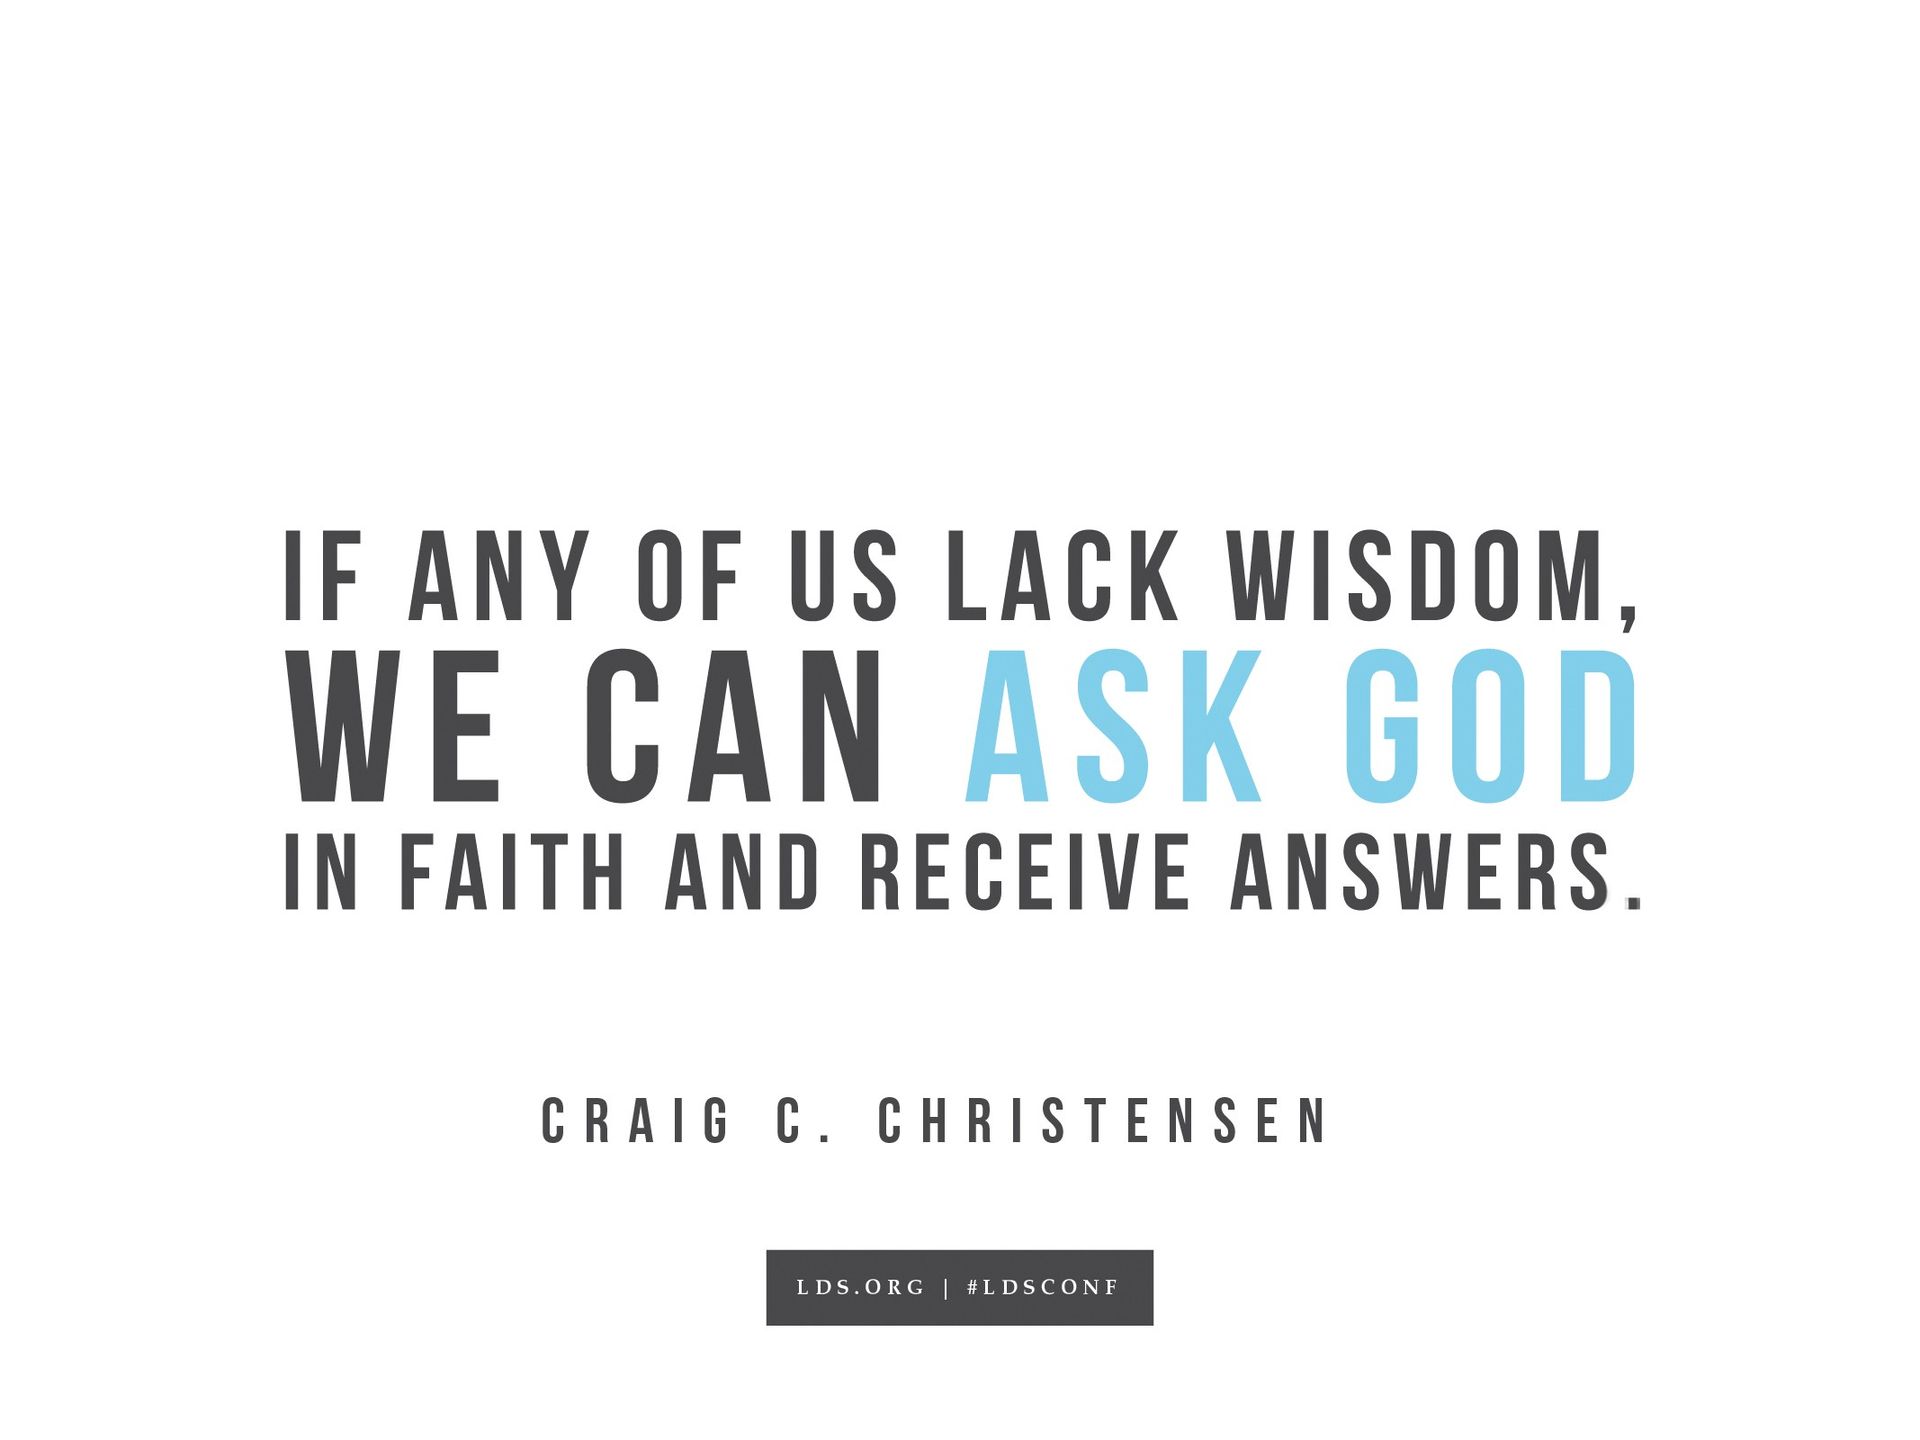 “If any of us lack wisdom, we can ask God in faith and receive answers.”—Craig C. Christensen, “A Choice Seer Will I Raise Up”